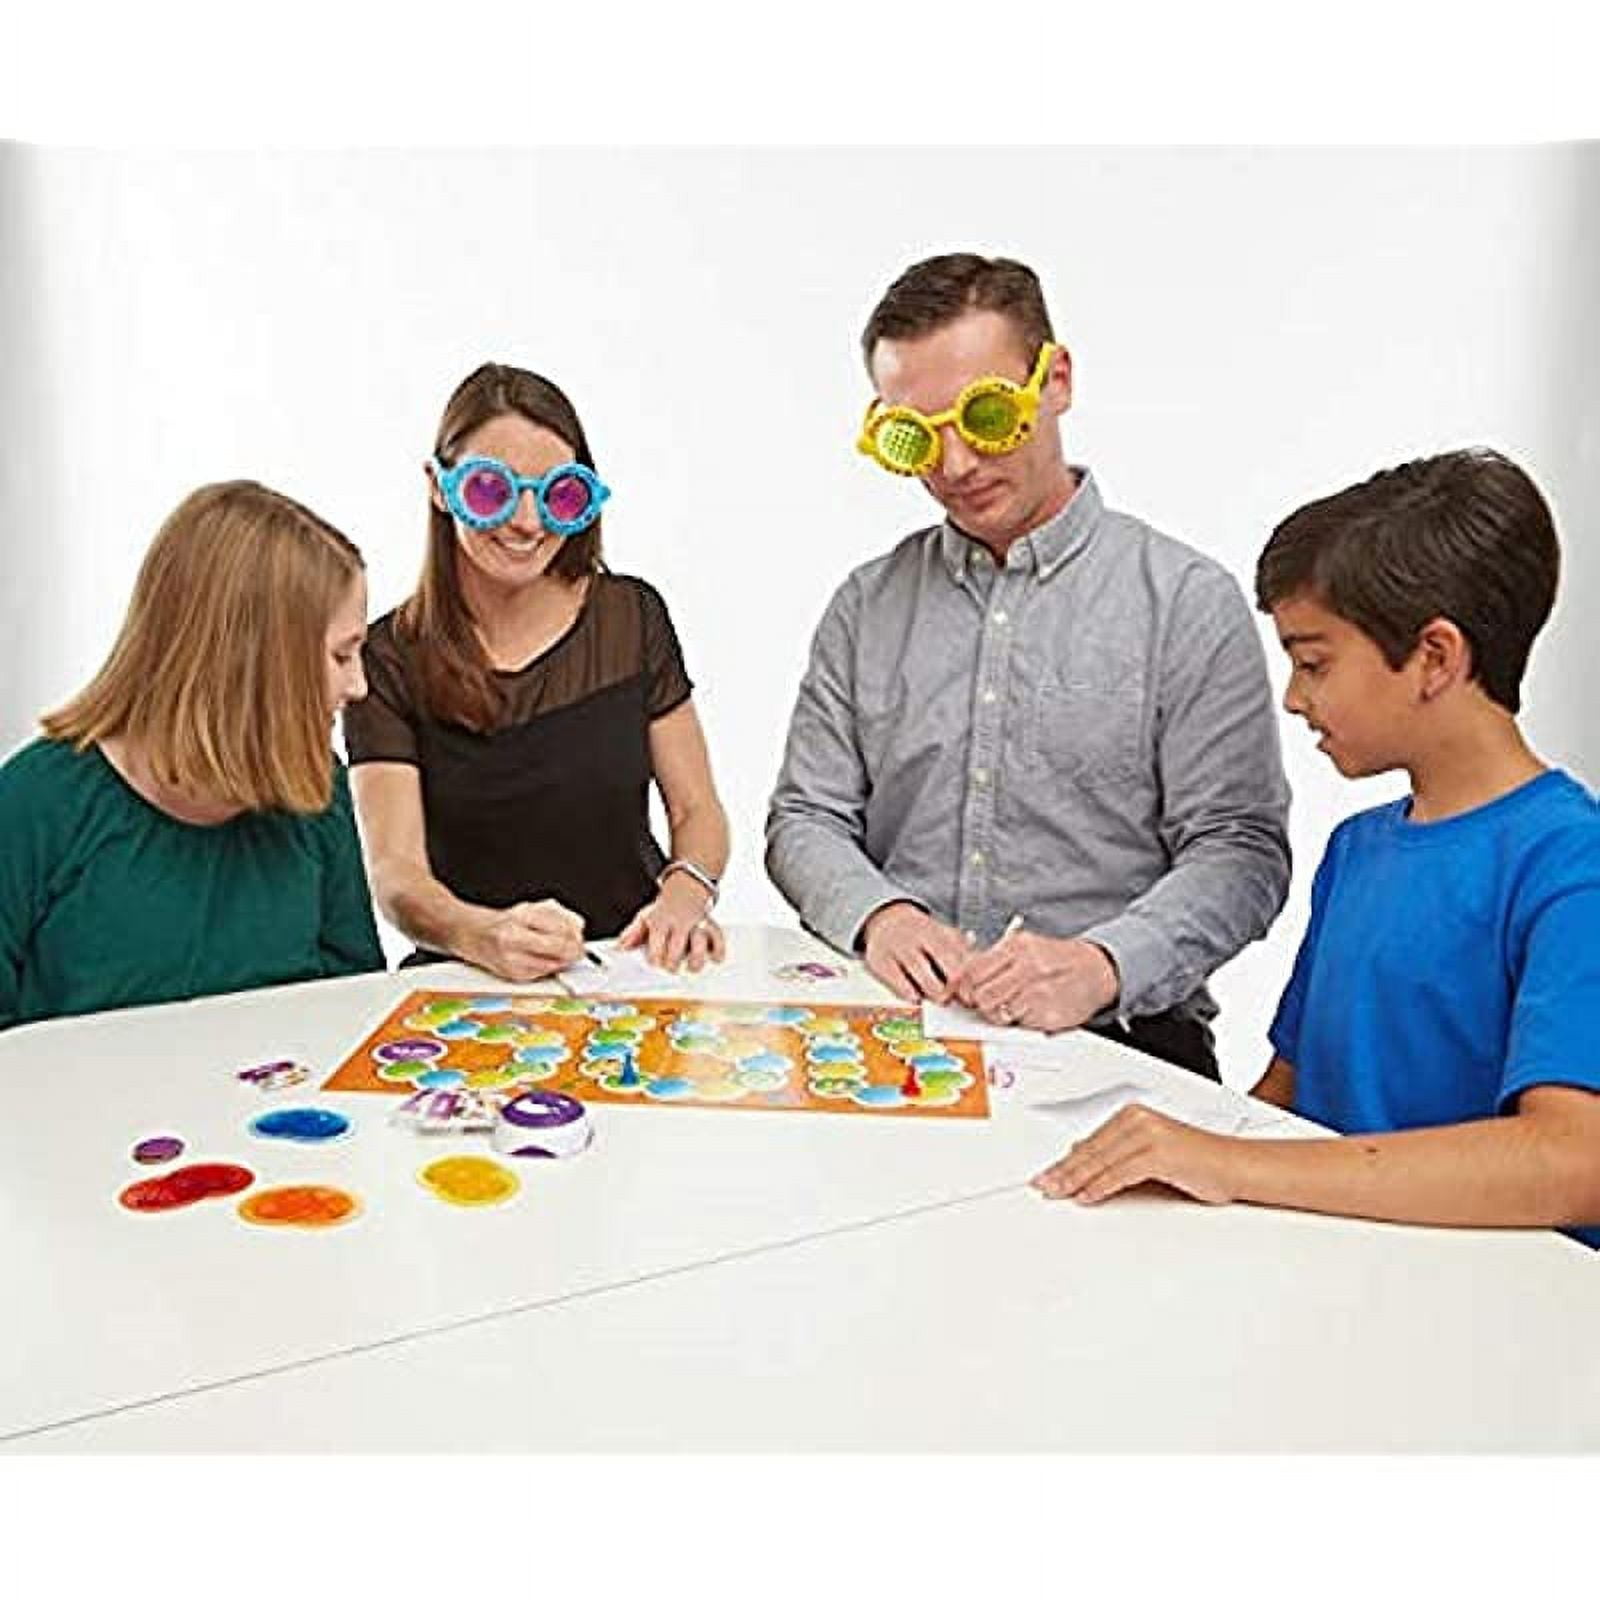 Googly Eyes Game — Family Drawing Game with Crazy, Vision-Altering Glasses  New